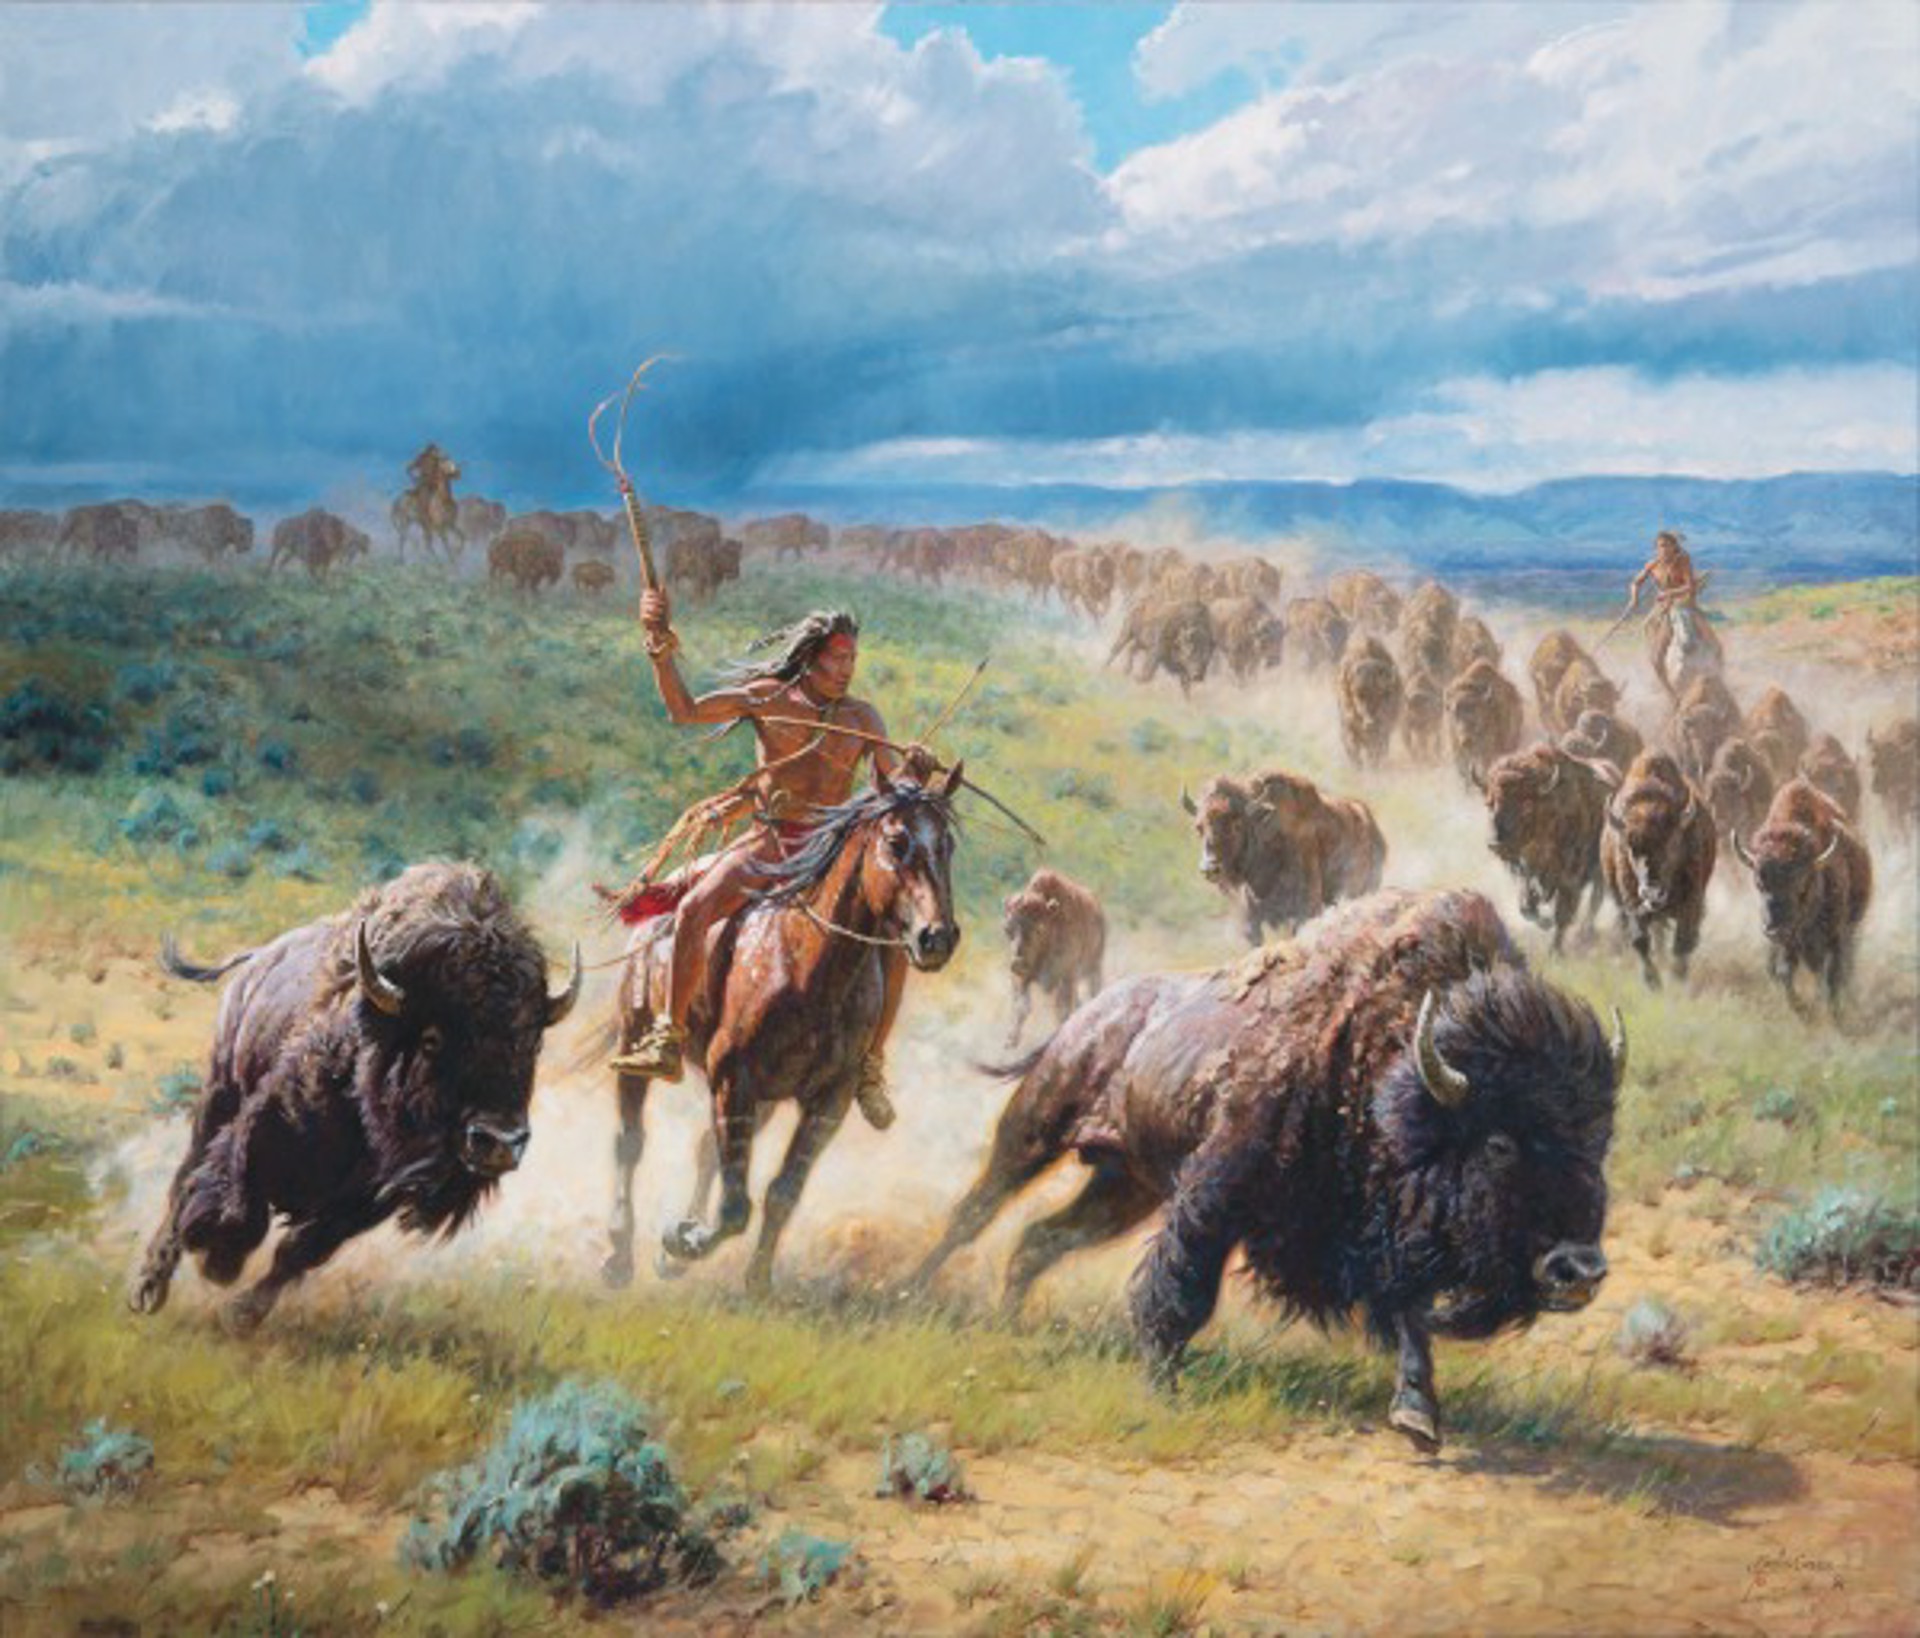 Chasing Thunder (30x36) by Martin Grelle